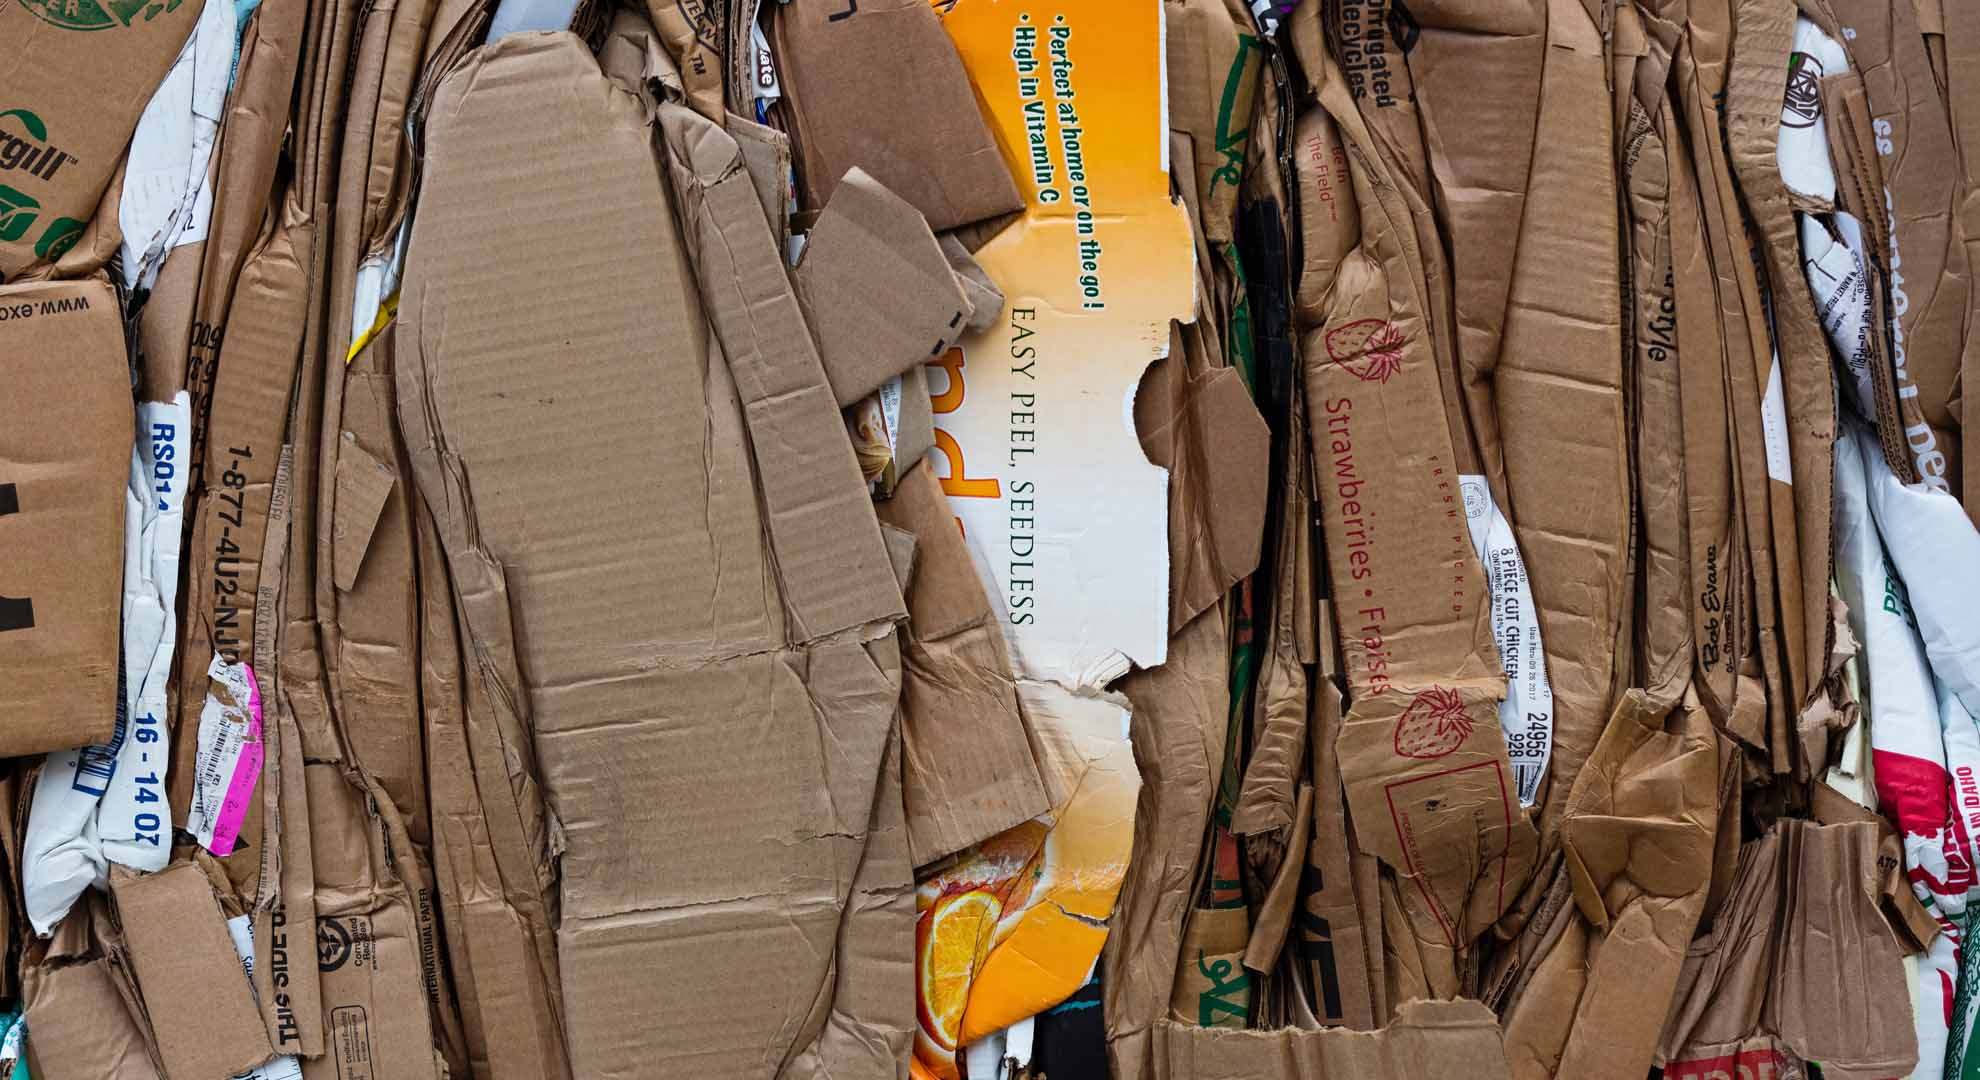 A pile of mixed cardboard